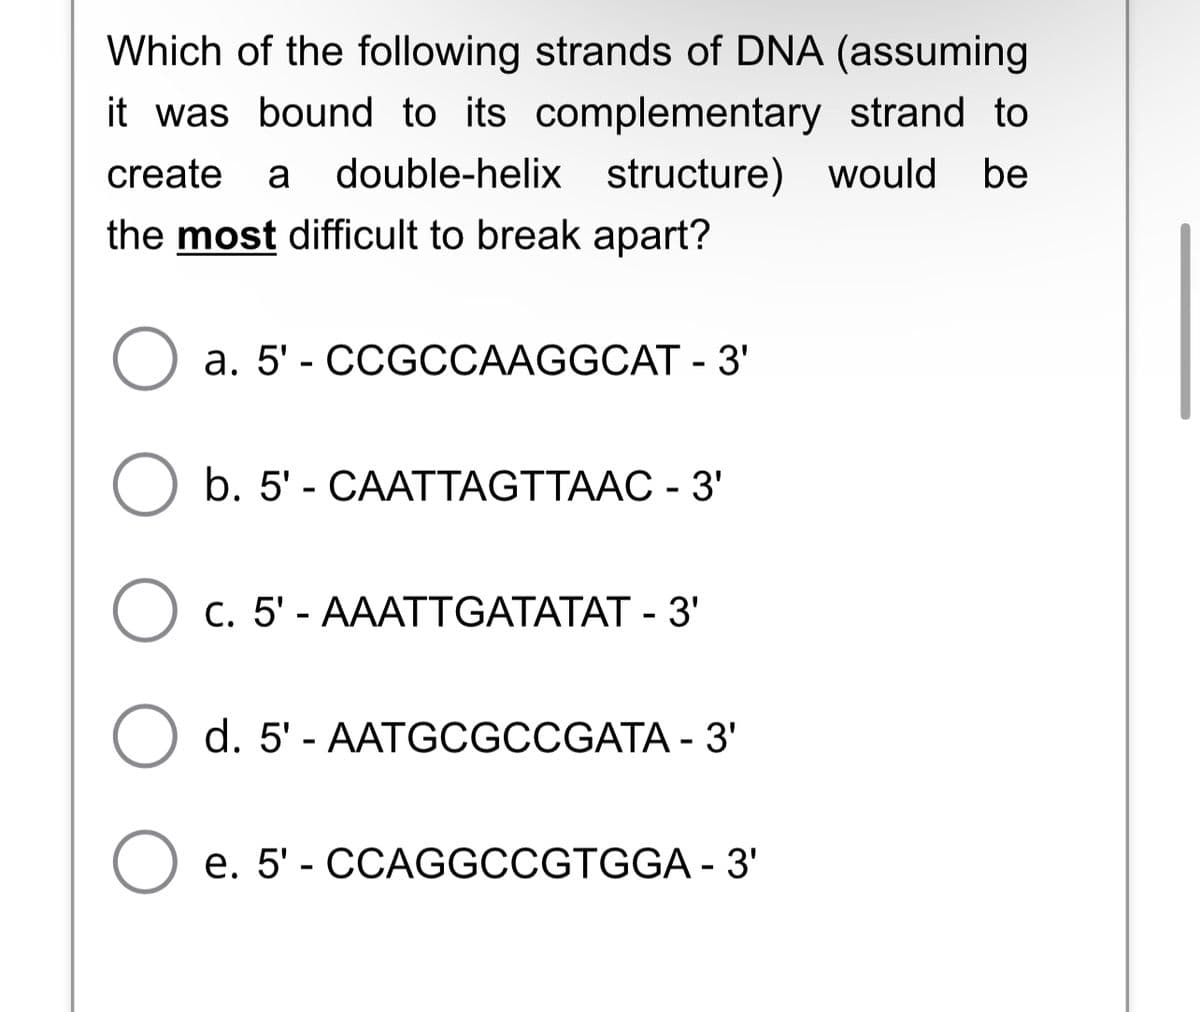 Which of the following strands of DNA (assuming
it was bound to its complementary strand to
create a double-helix structure) would be
the most difficult to break apart?
O a. 5'- CCGCCAAGGCAT - 3'
O b. 5' - CAATTAGTTAAC - 3'
O
C. 5'- AAATTGATATAT - 3'
d. 5'- AATGCGCCGATA - 3'
e. 5'- CCAGGCCGTGGA - 3'